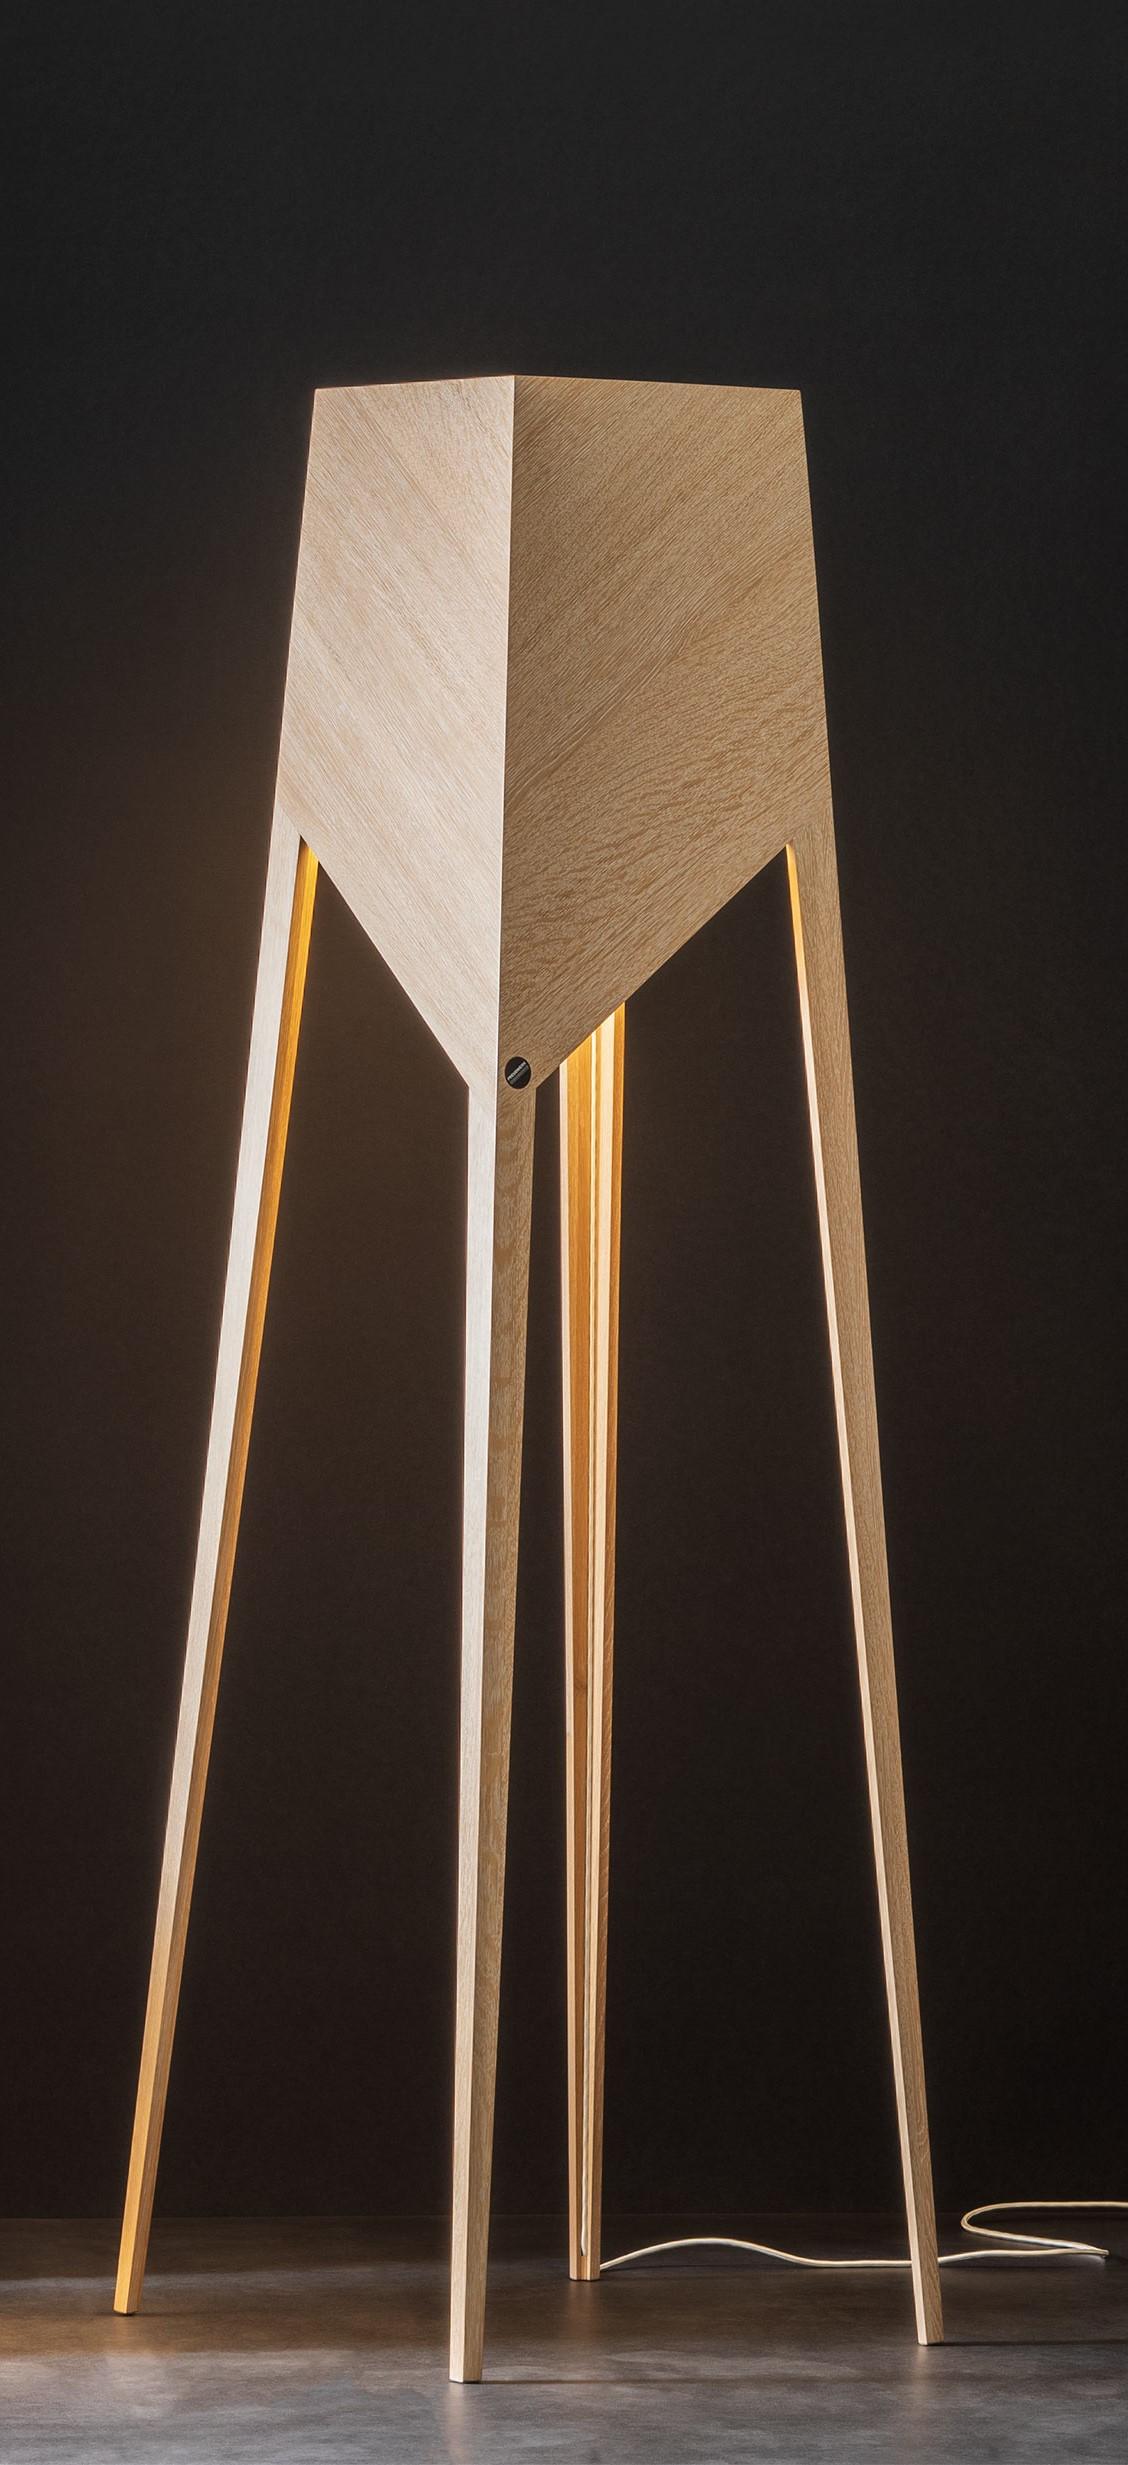 Luise Mum floor lamp by Matthias Scherzinger.
Dimensions: H 185 x 55 cm.
Materials: oak: white lyed, oil.

All our lamps can be wired according to each country. If sold to the USA it will be wired for the USA for instance.

Medium and small